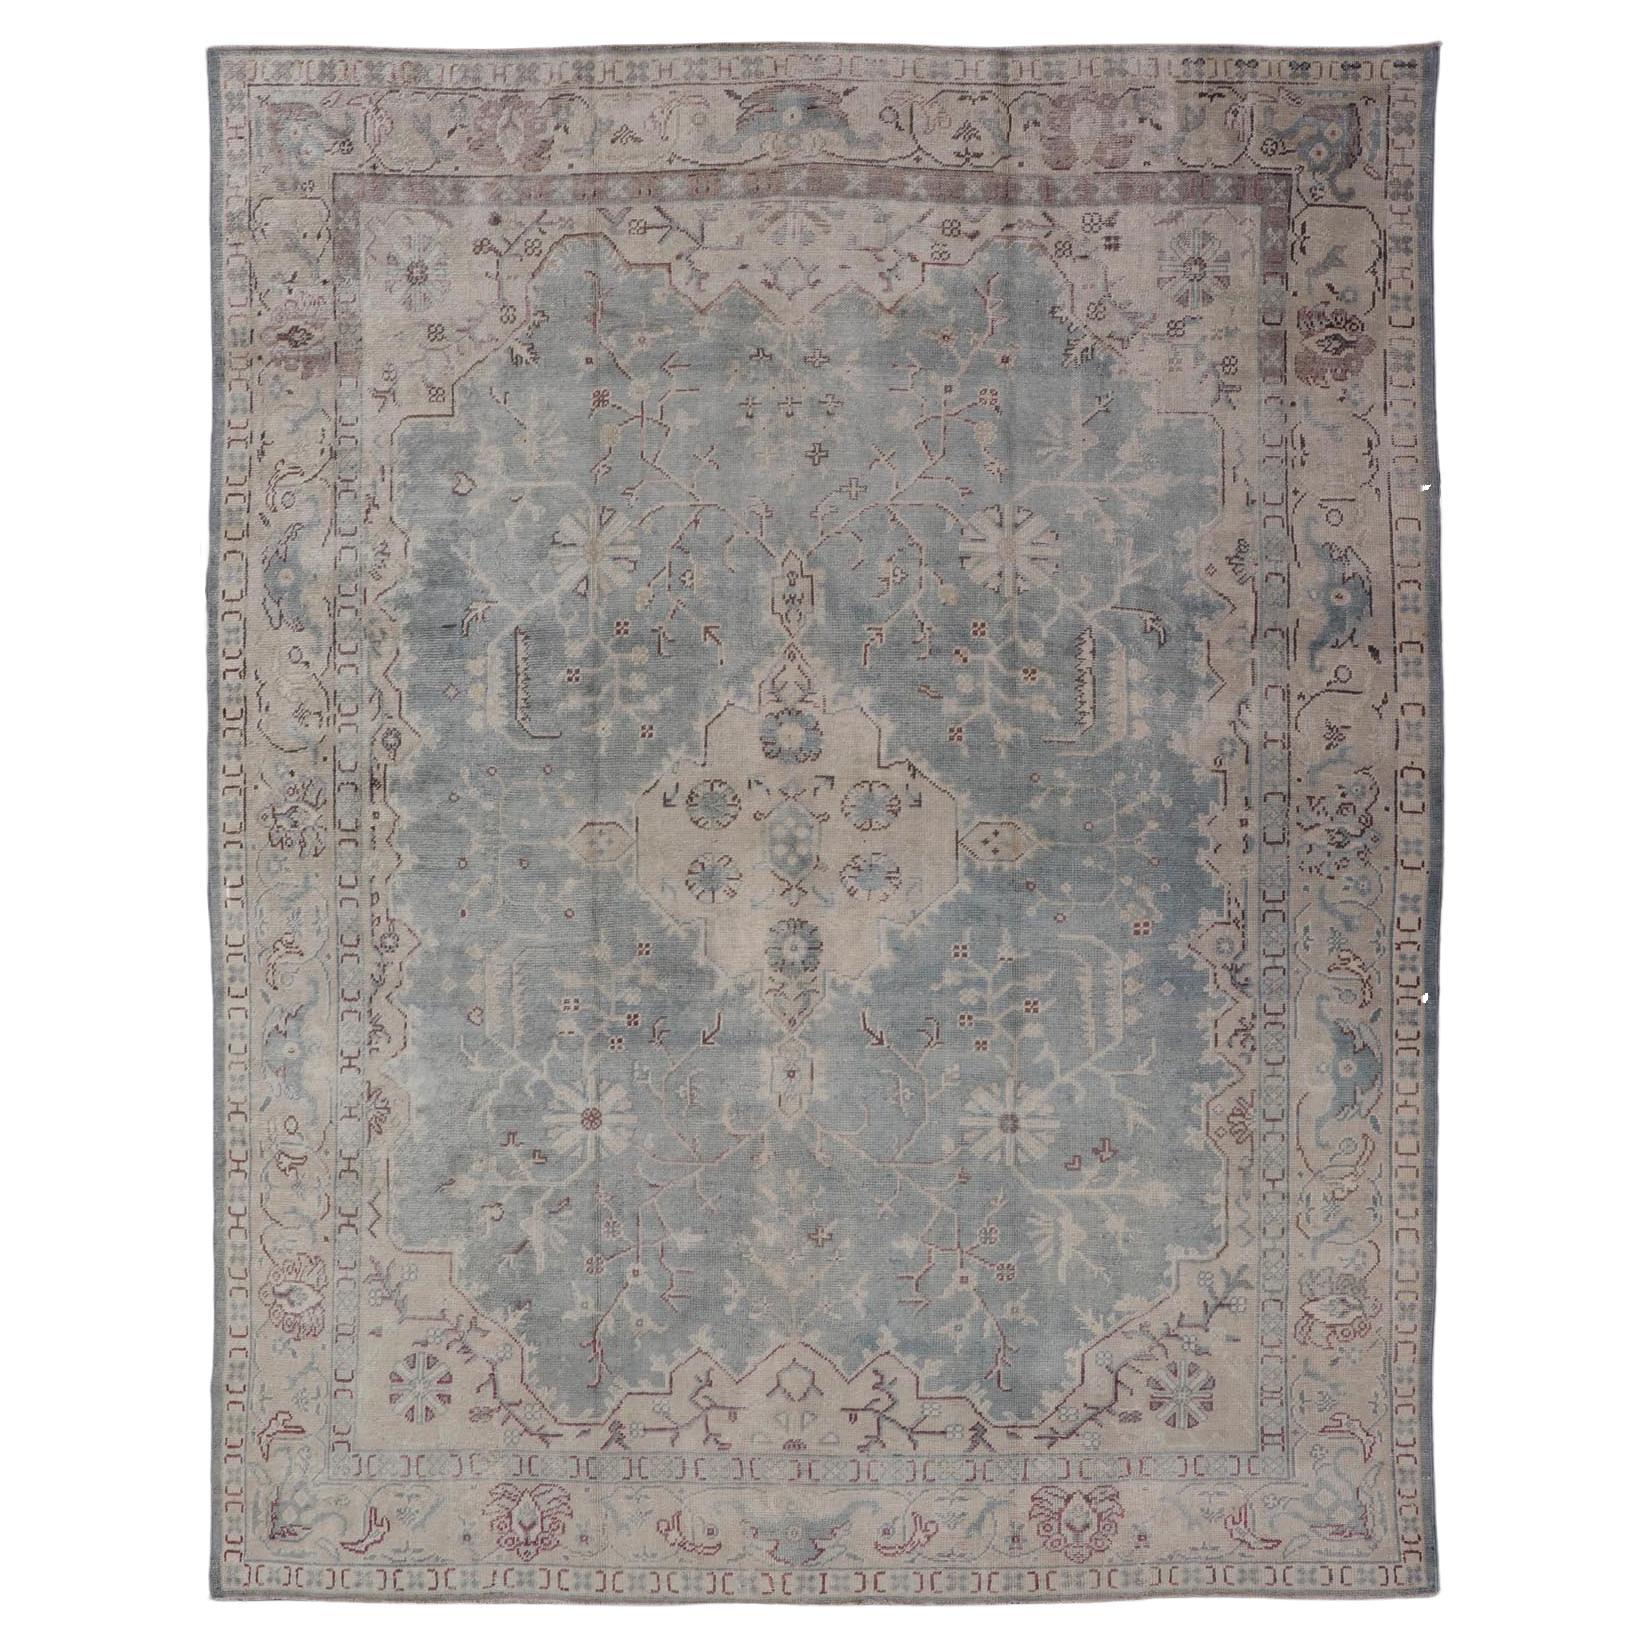 Antique Oushak Rug in Light Gray-Blue by Keivan Woven Arts 10'9 x 14'2